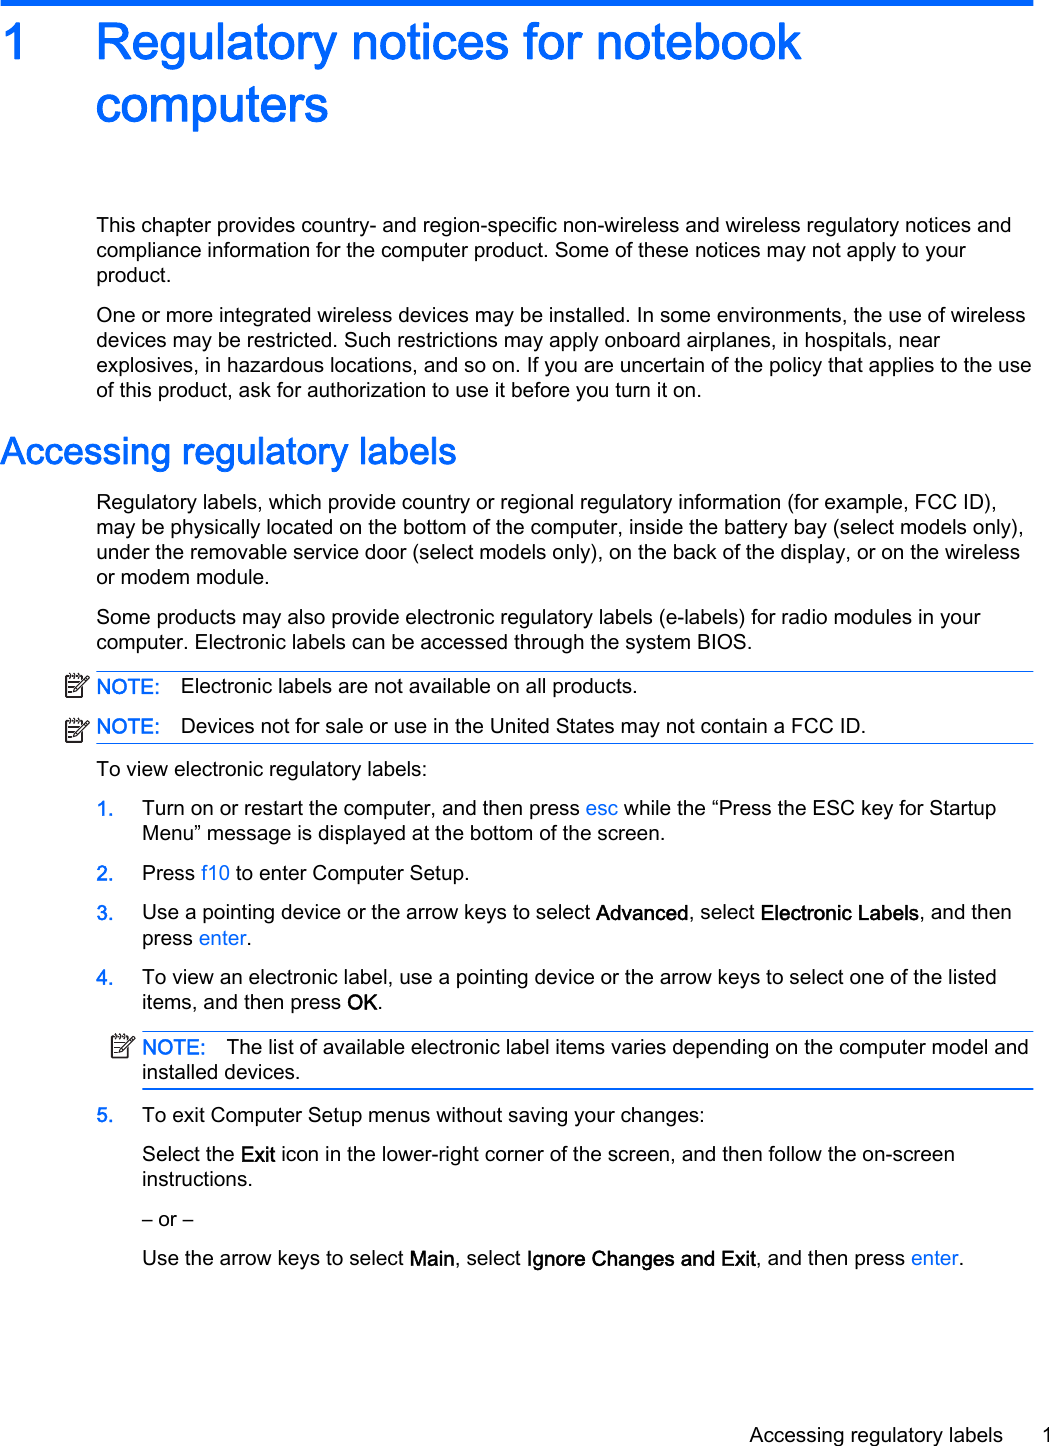 1 Regulatory notices for notebookcomputersThis chapter provides country- and region-specific non-wireless and wireless regulatory notices andcompliance information for the computer product. Some of these notices may not apply to yourproduct.One or more integrated wireless devices may be installed. In some environments, the use of wirelessdevices may be restricted. Such restrictions may apply onboard airplanes, in hospitals, nearexplosives, in hazardous locations, and so on. If you are uncertain of the policy that applies to the useof this product, ask for authorization to use it before you turn it on.Accessing regulatory labelsRegulatory labels, which provide country or regional regulatory information (for example, FCC ID),may be physically located on the bottom of the computer, inside the battery bay (select models only),under the removable service door (select models only), on the back of the display, or on the wirelessor modem module.Some products may also provide electronic regulatory labels (e-labels) for radio modules in yourcomputer. Electronic labels can be accessed through the system BIOS.NOTE: Electronic labels are not available on all products.NOTE: Devices not for sale or use in the United States may not contain a FCC ID.To view electronic regulatory labels:1. Turn on or restart the computer, and then press esc while the “Press the ESC key for StartupMenu” message is displayed at the bottom of the screen.2. Press f10 to enter Computer Setup.3. Use a pointing device or the arrow keys to select Advanced, select Electronic Labels, and thenpress enter.4. To view an electronic label, use a pointing device or the arrow keys to select one of the listeditems, and then press OK.NOTE: The list of available electronic label items varies depending on the computer model andinstalled devices.5. To exit Computer Setup menus without saving your changes:Select the Exit icon in the lower-right corner of the screen, and then follow the on-screeninstructions.– or –Use the arrow keys to select Main, select Ignore Changes and Exit, and then press enter.Accessing regulatory labels 1